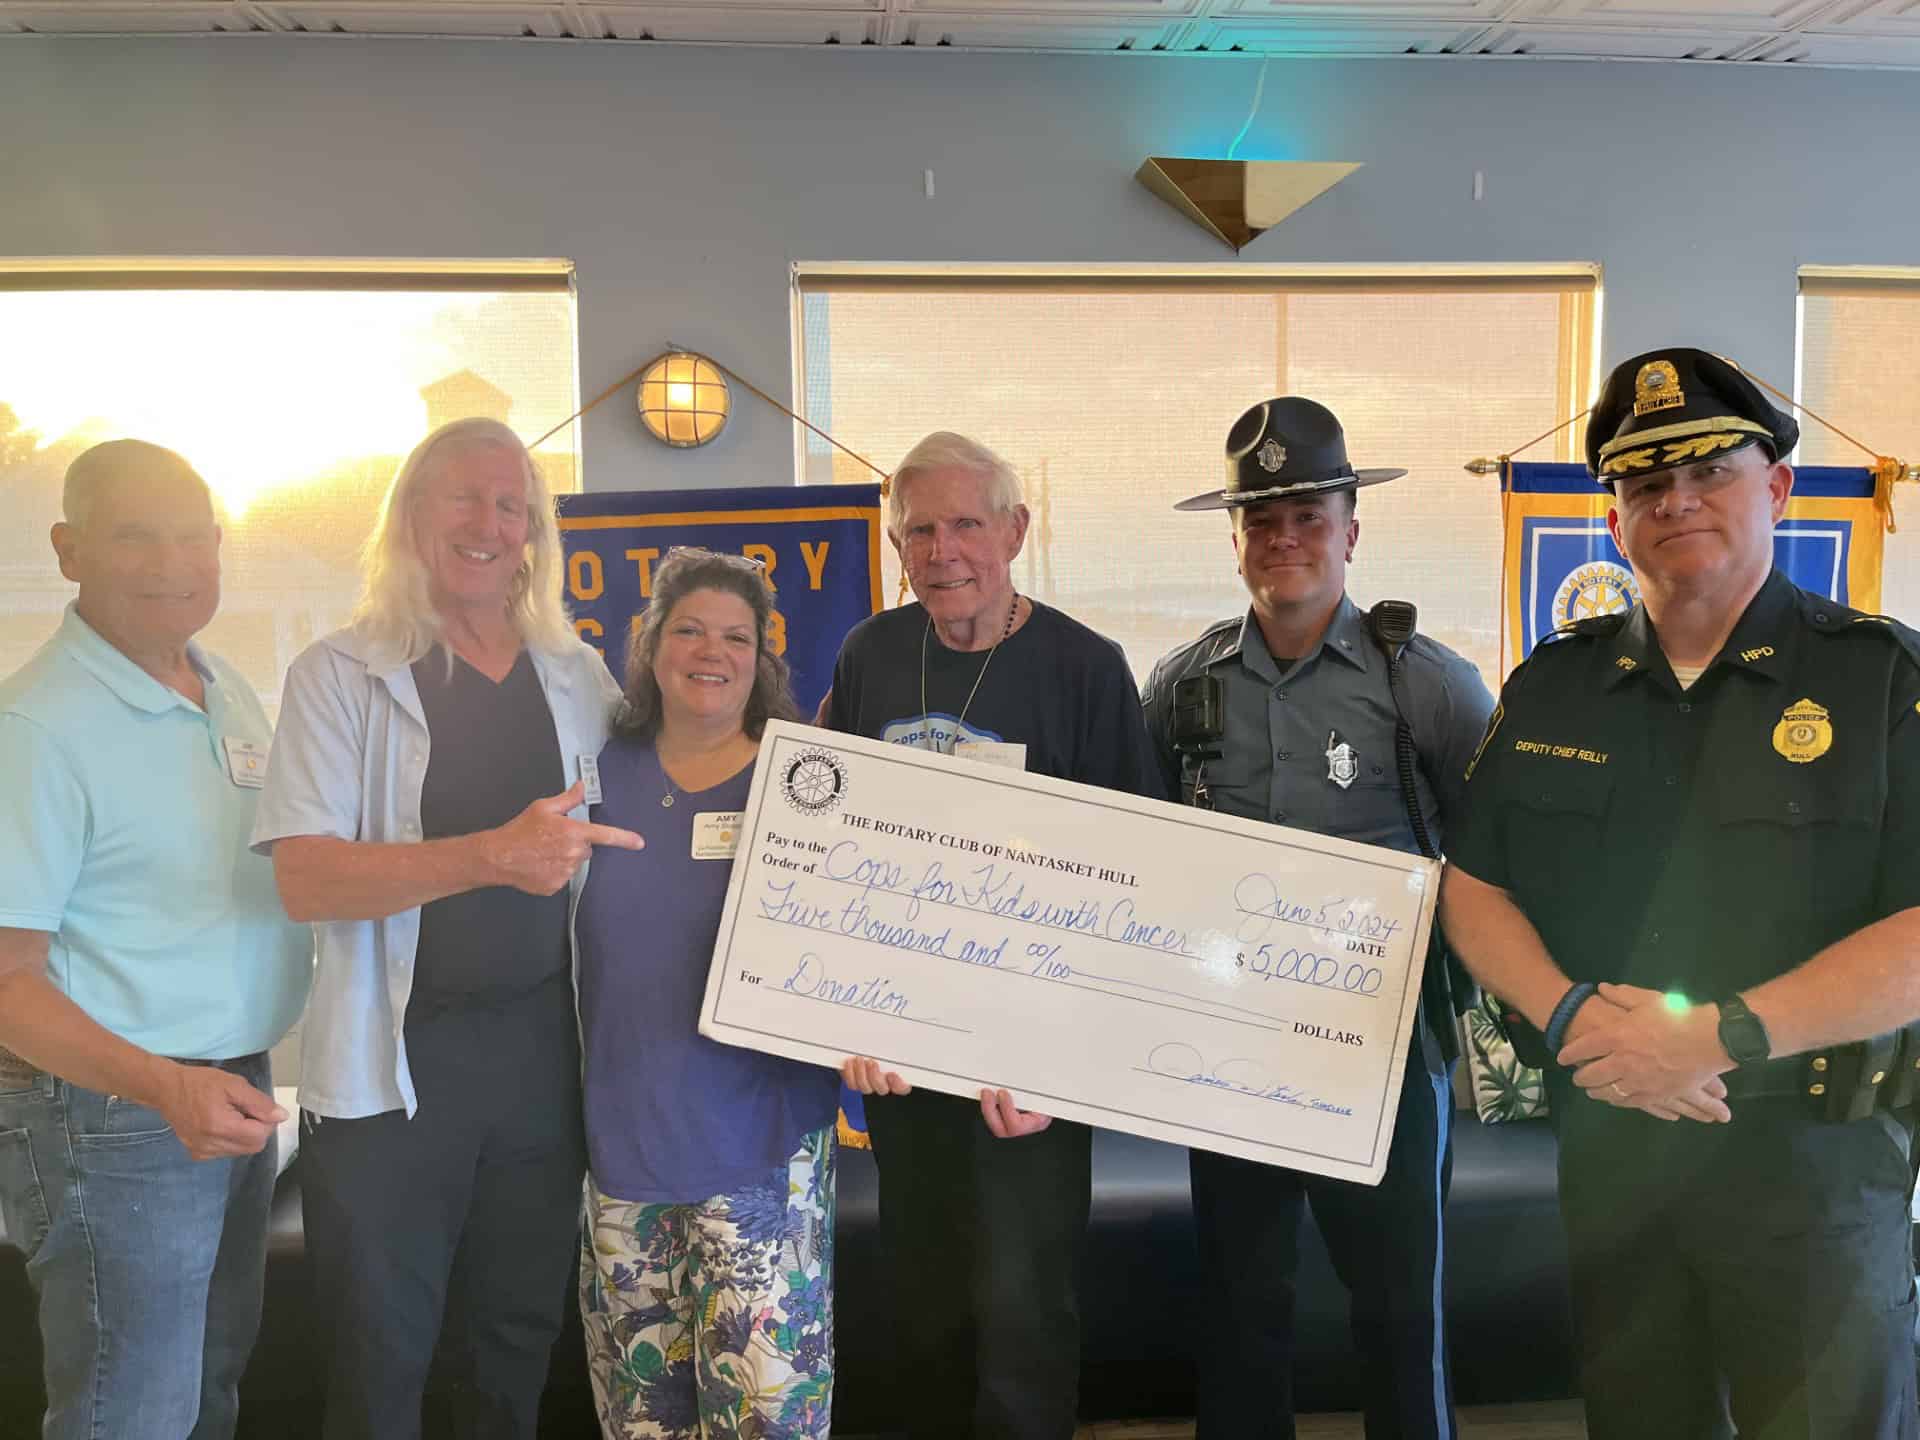 $5000 Donation Received from The Rotary Club of Nantasket Hull